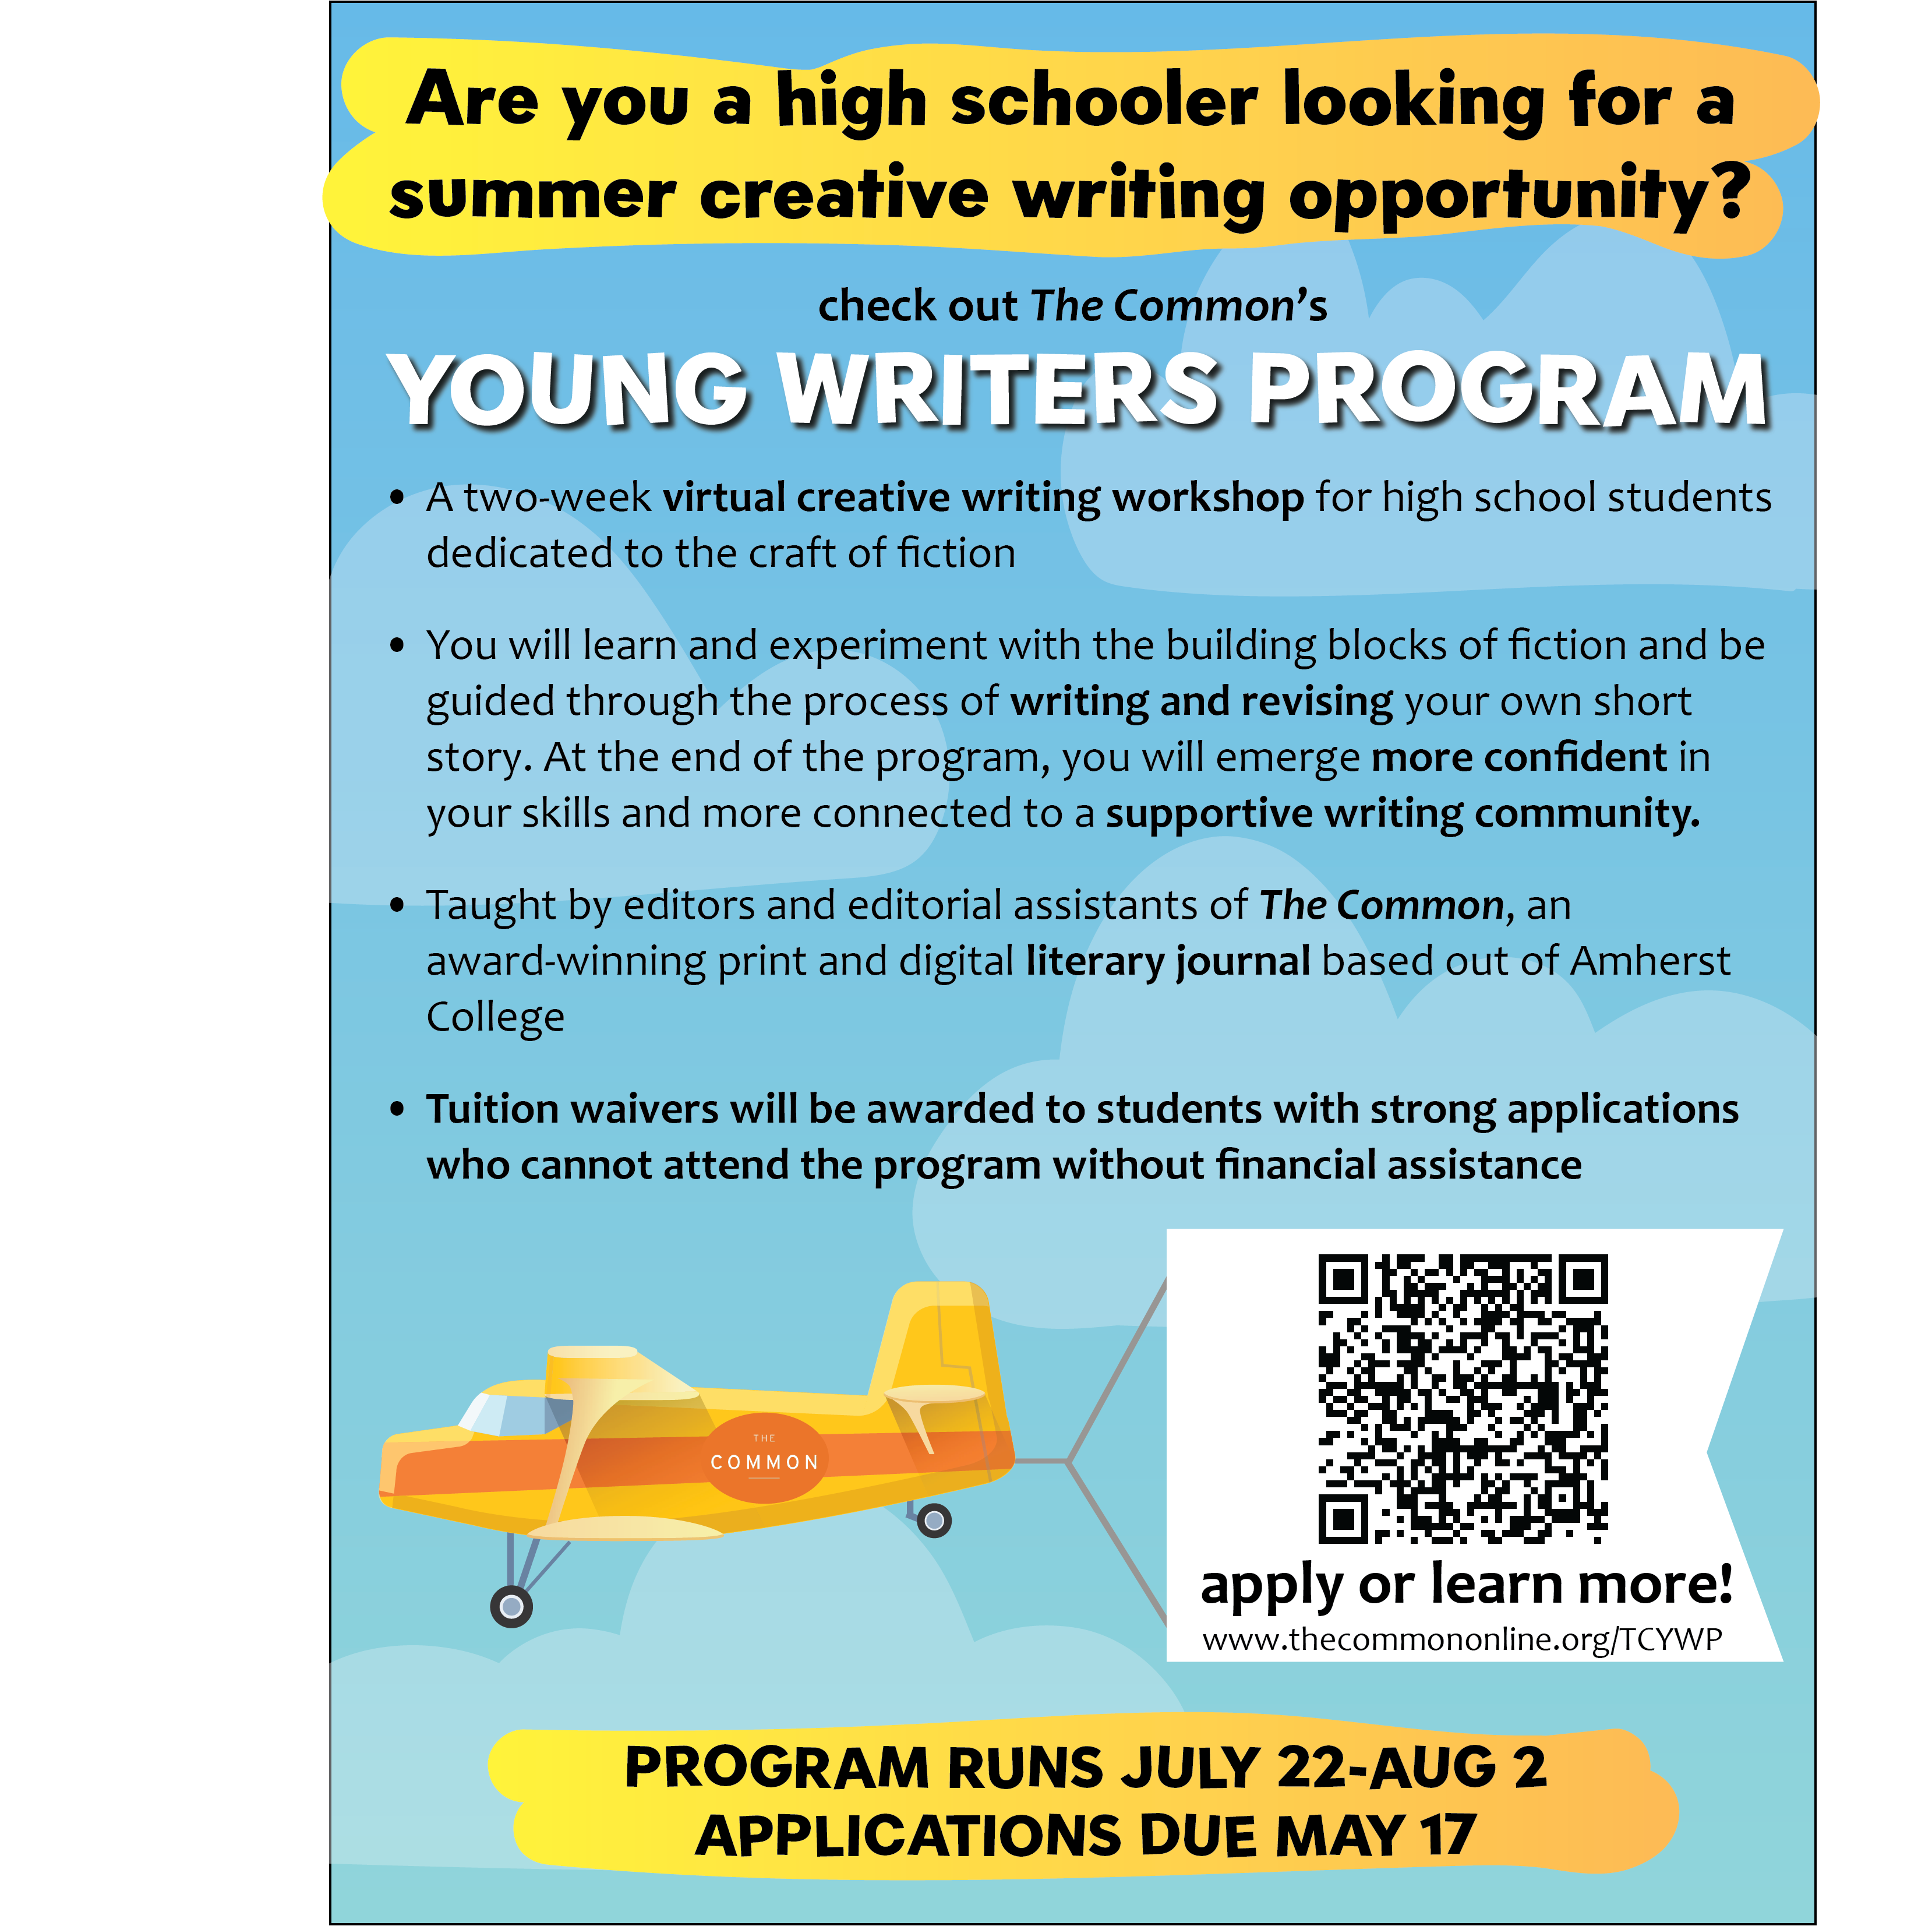 Applications are Open for The Common Young Writers Program!